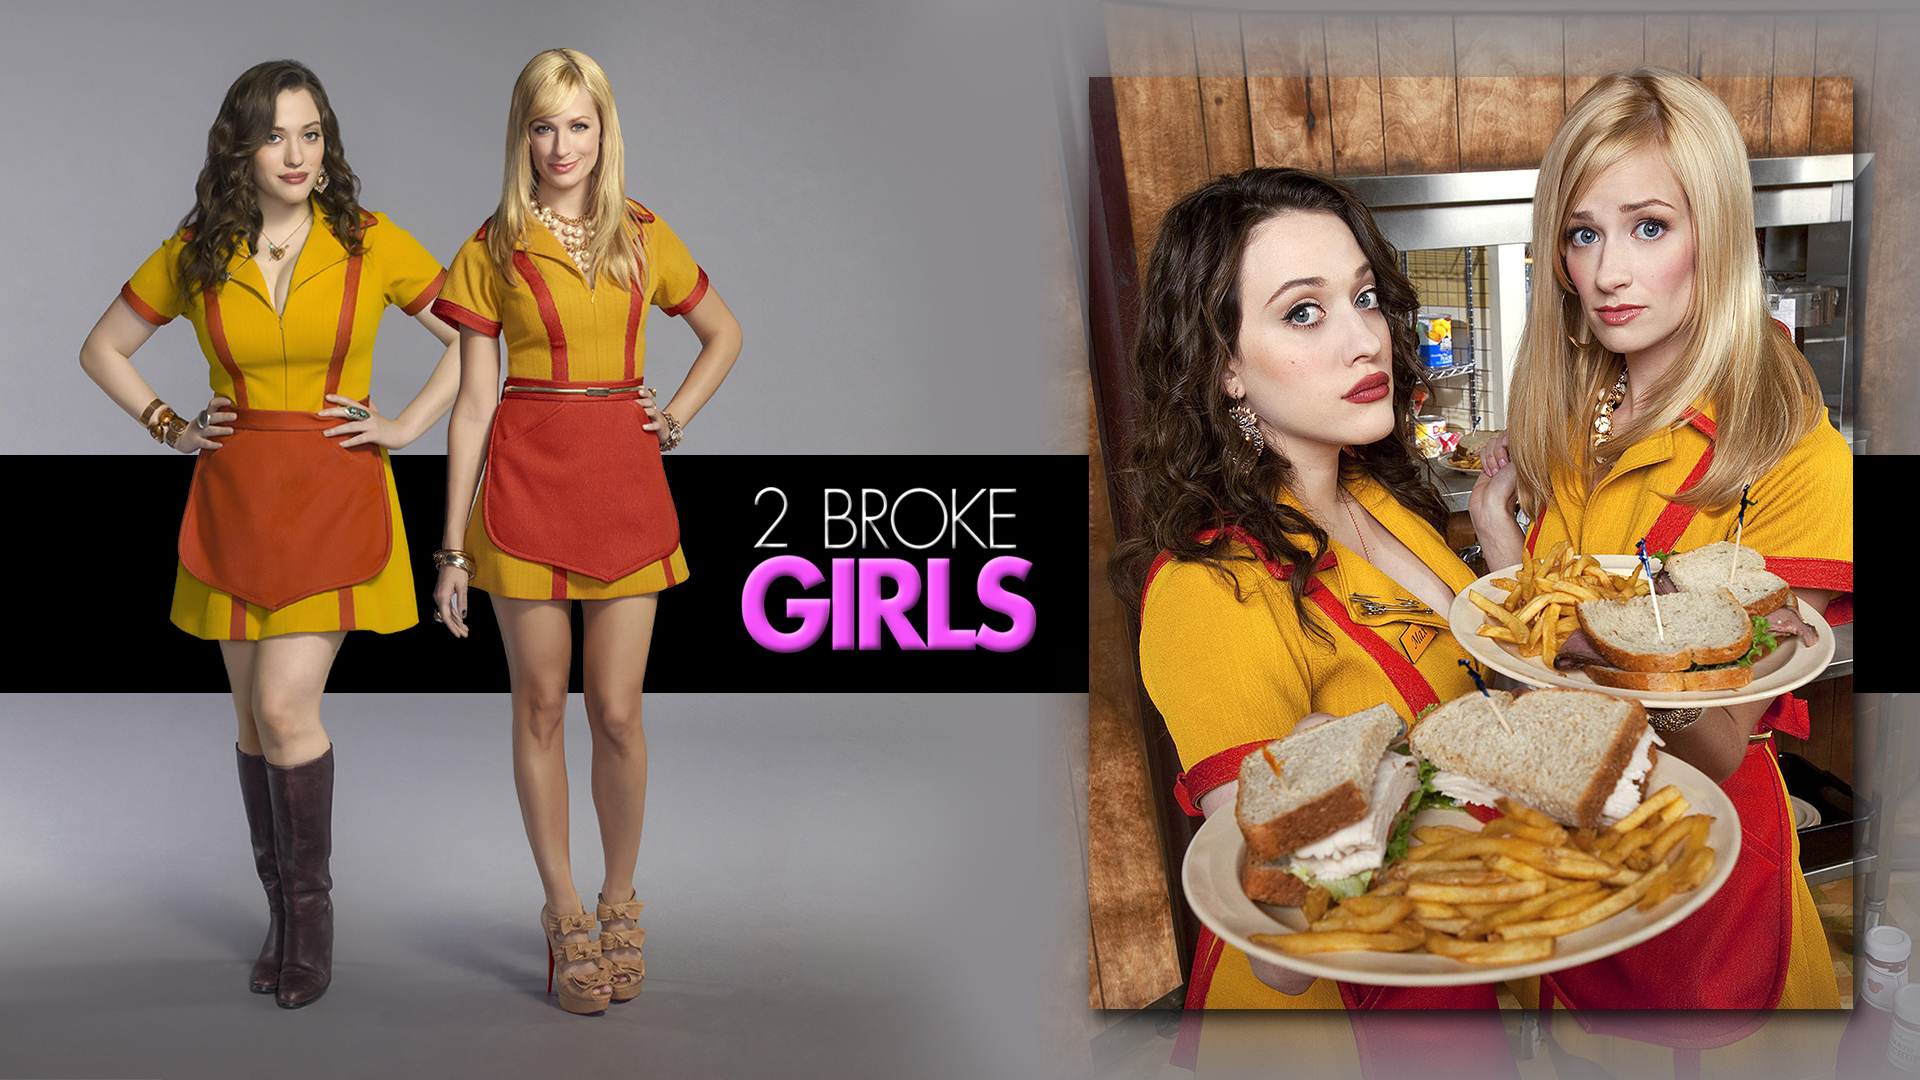 cary ford recommends 2 broke girls hot pics pic